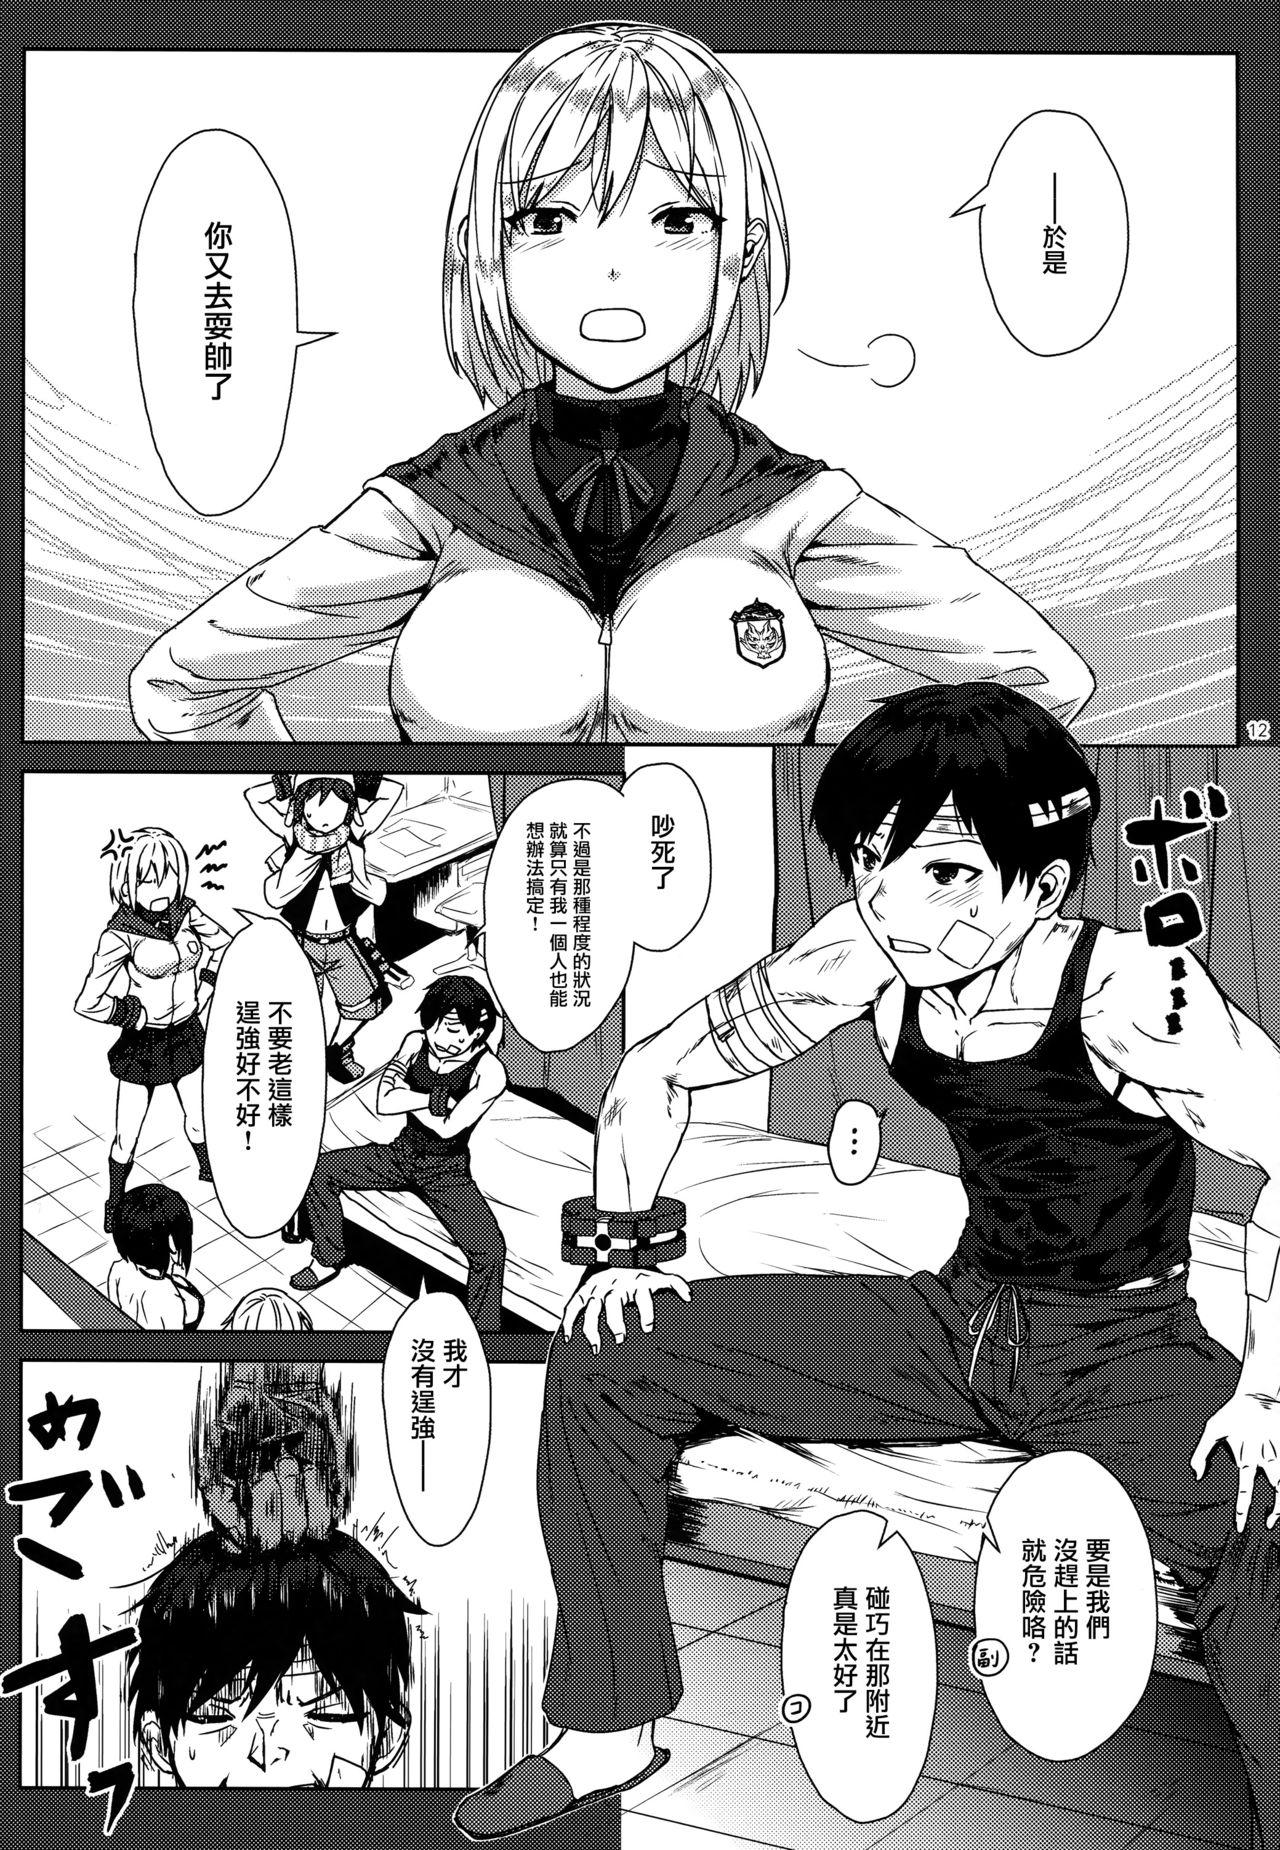 Ghetto Again #3 All That Heaven Allows - God eater Rubbing - Page 11